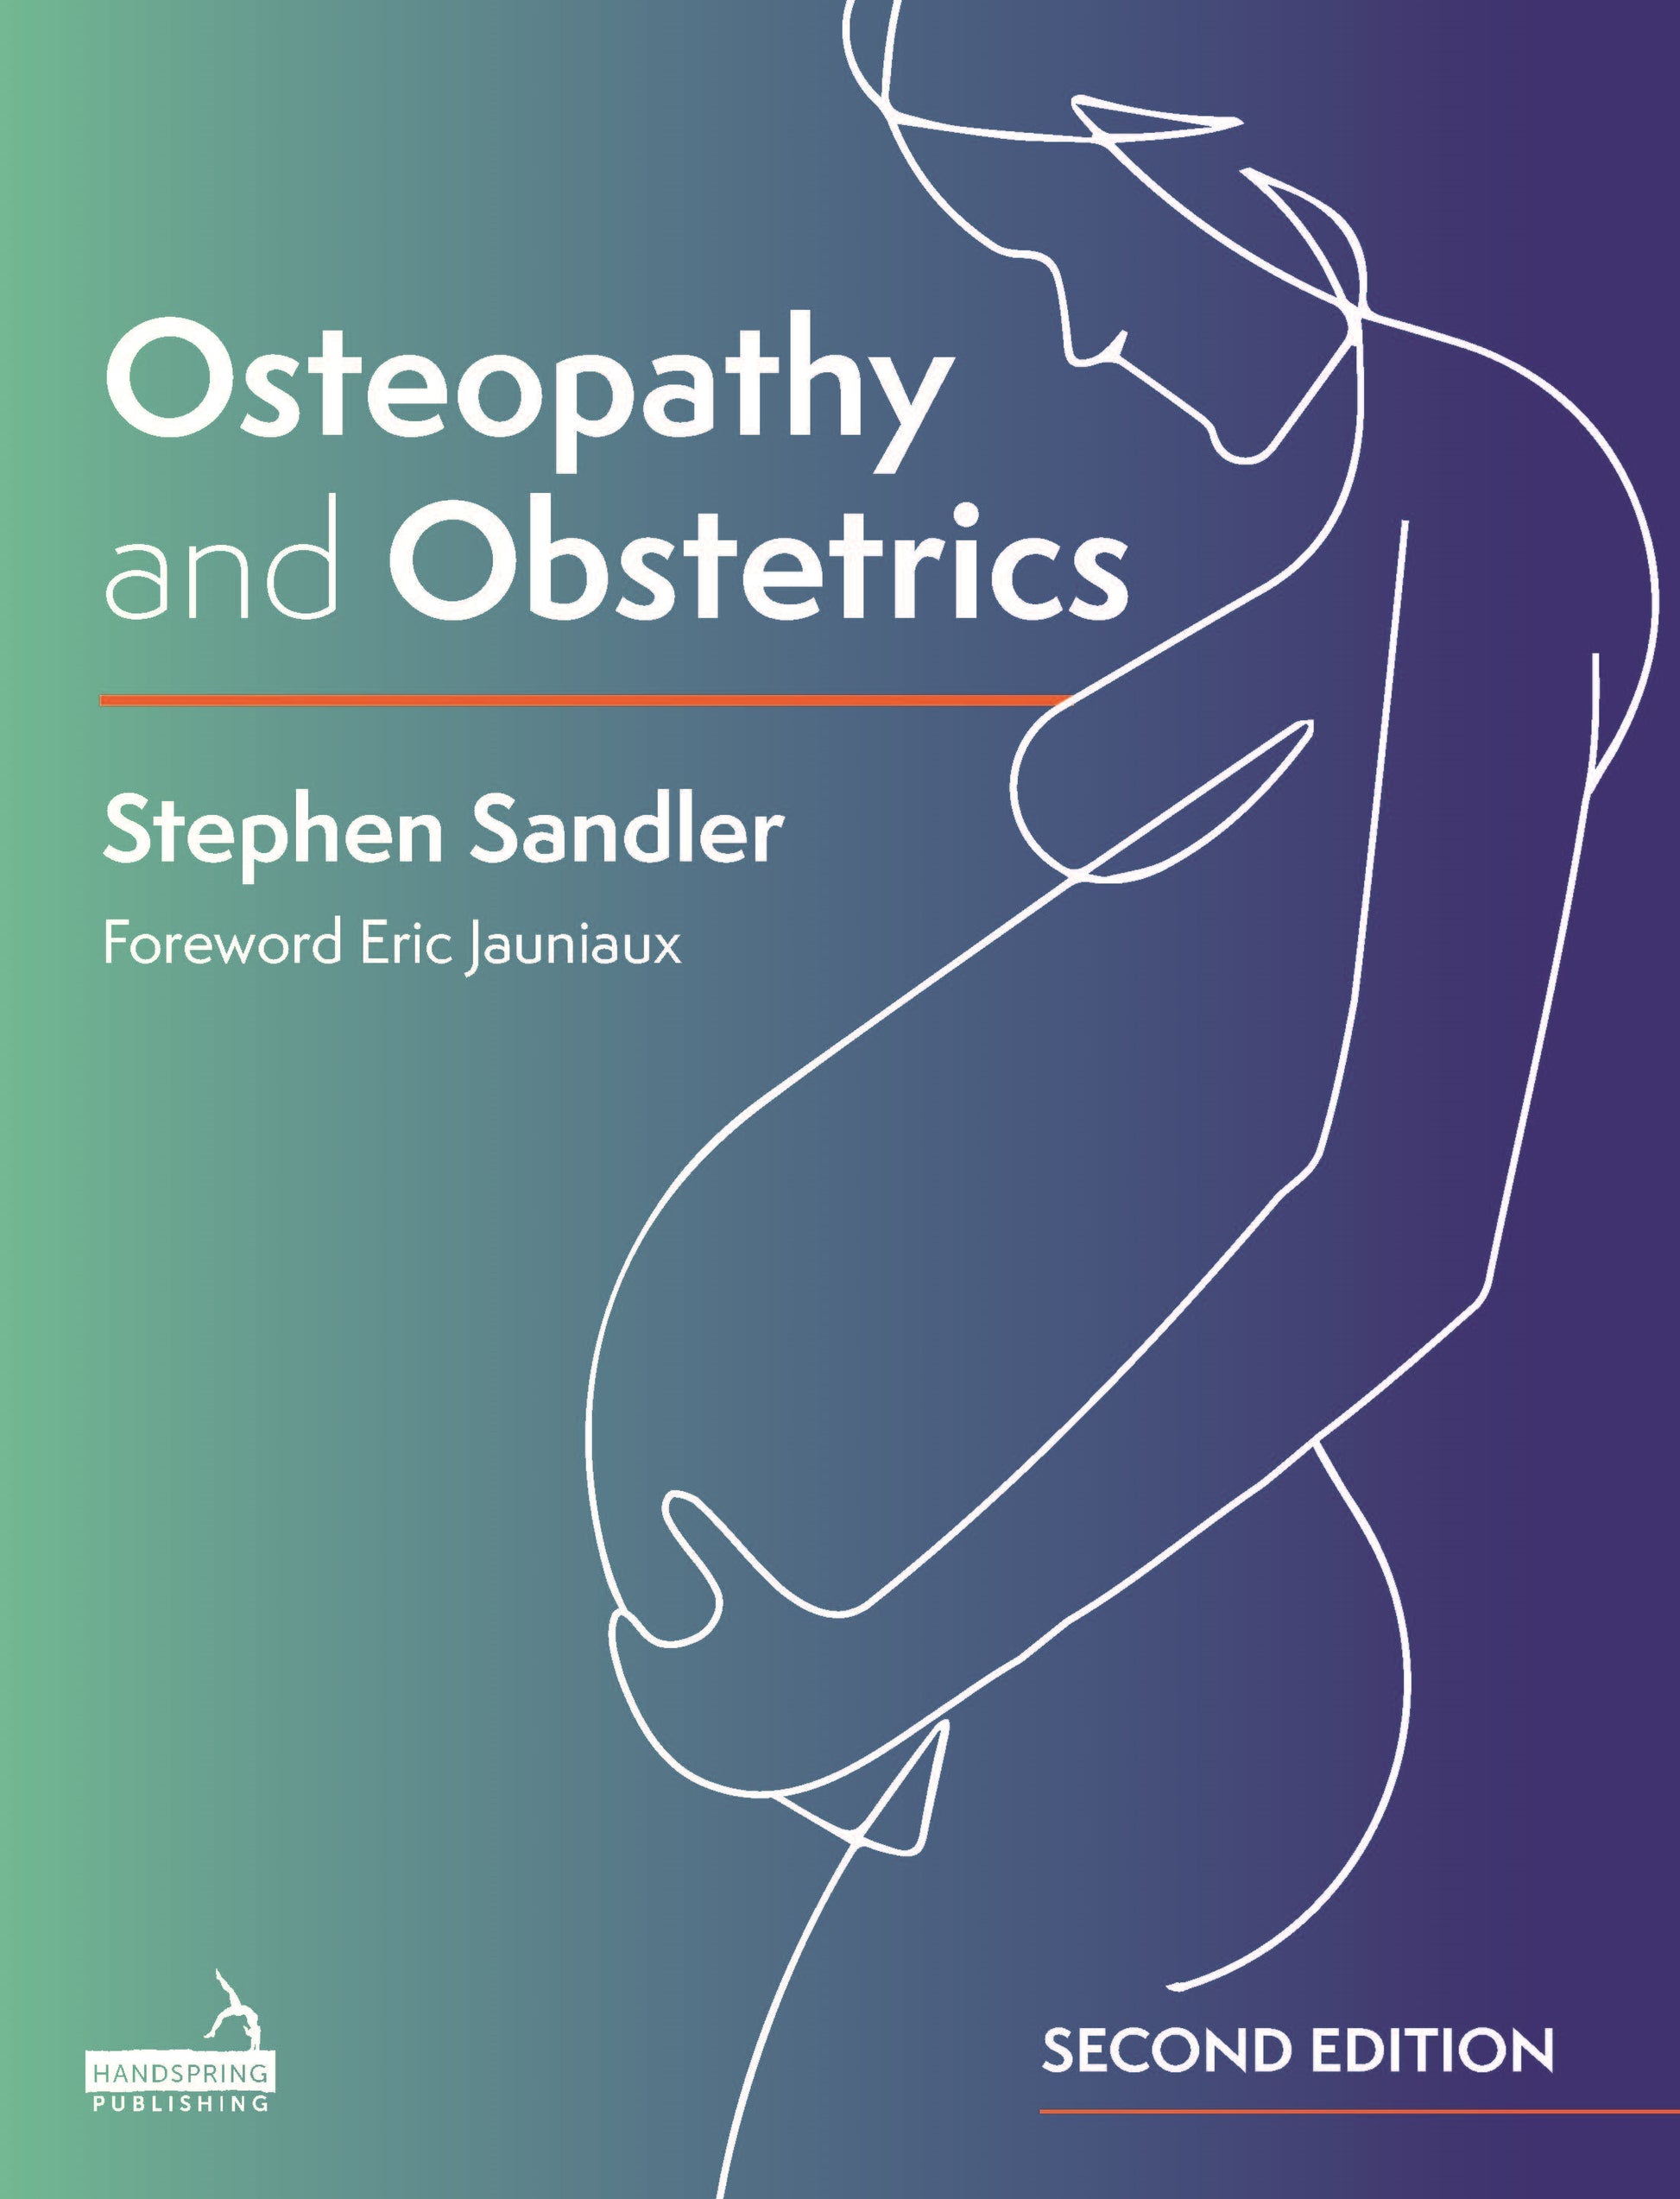 Osteopathy and Obstetrics by Stephen Sandler